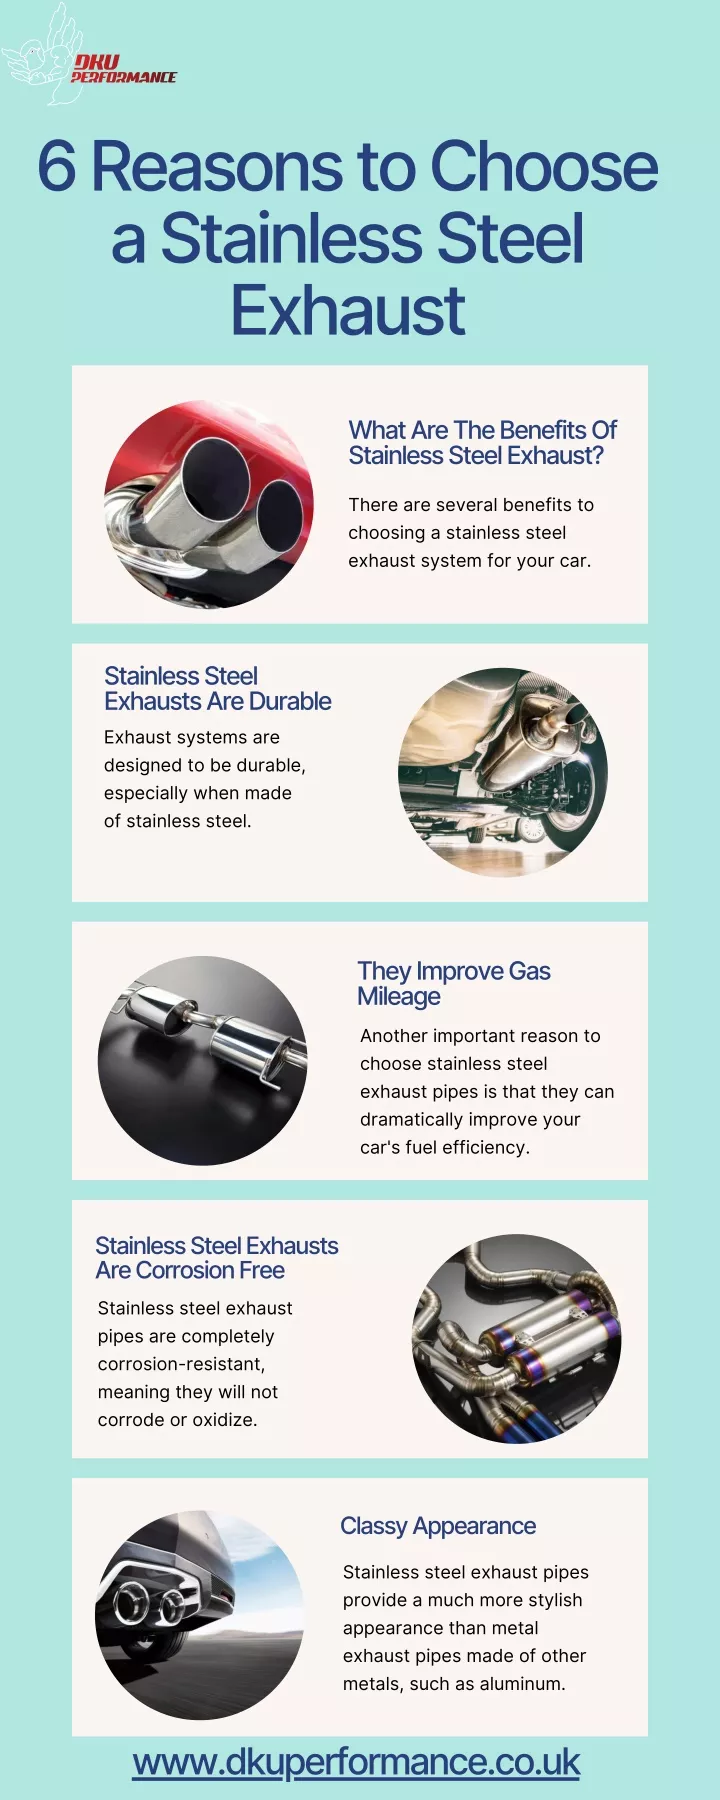 6 reasons to choose a stainless steel exhaust